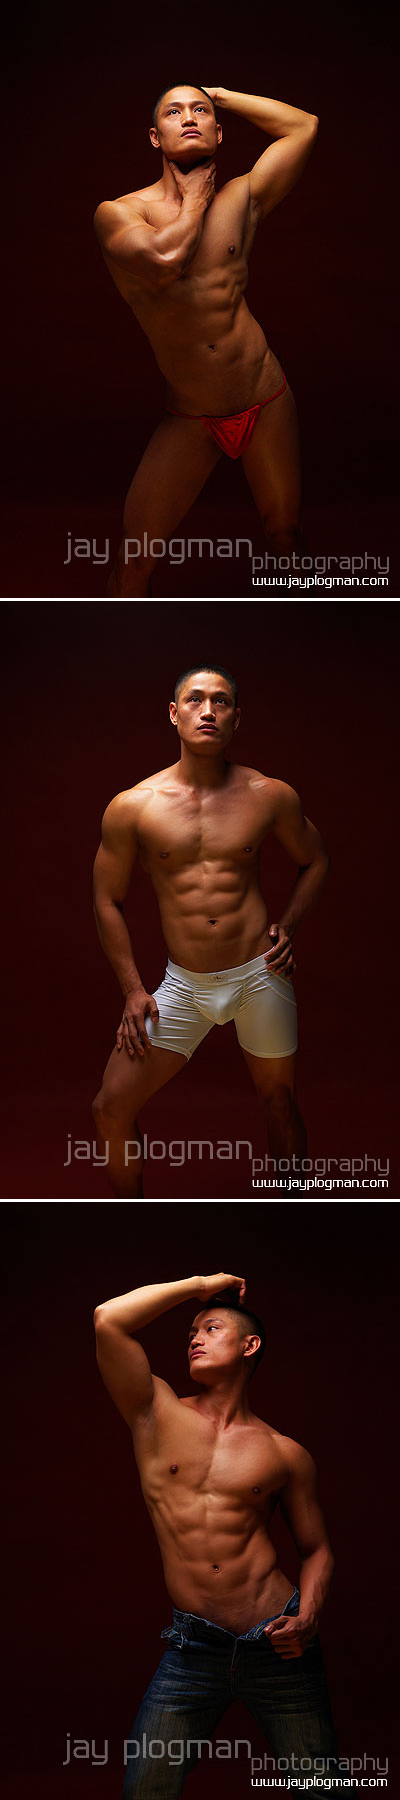 Male model photo shoot of Jay Plogman Photography in Makati, Philippines